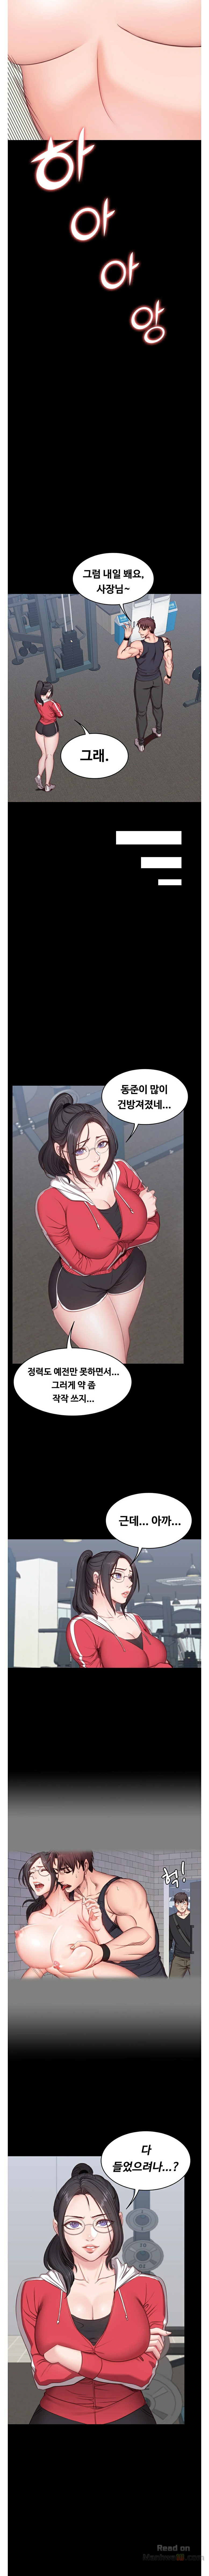 Fitness Raw - Chapter 4 Page 5